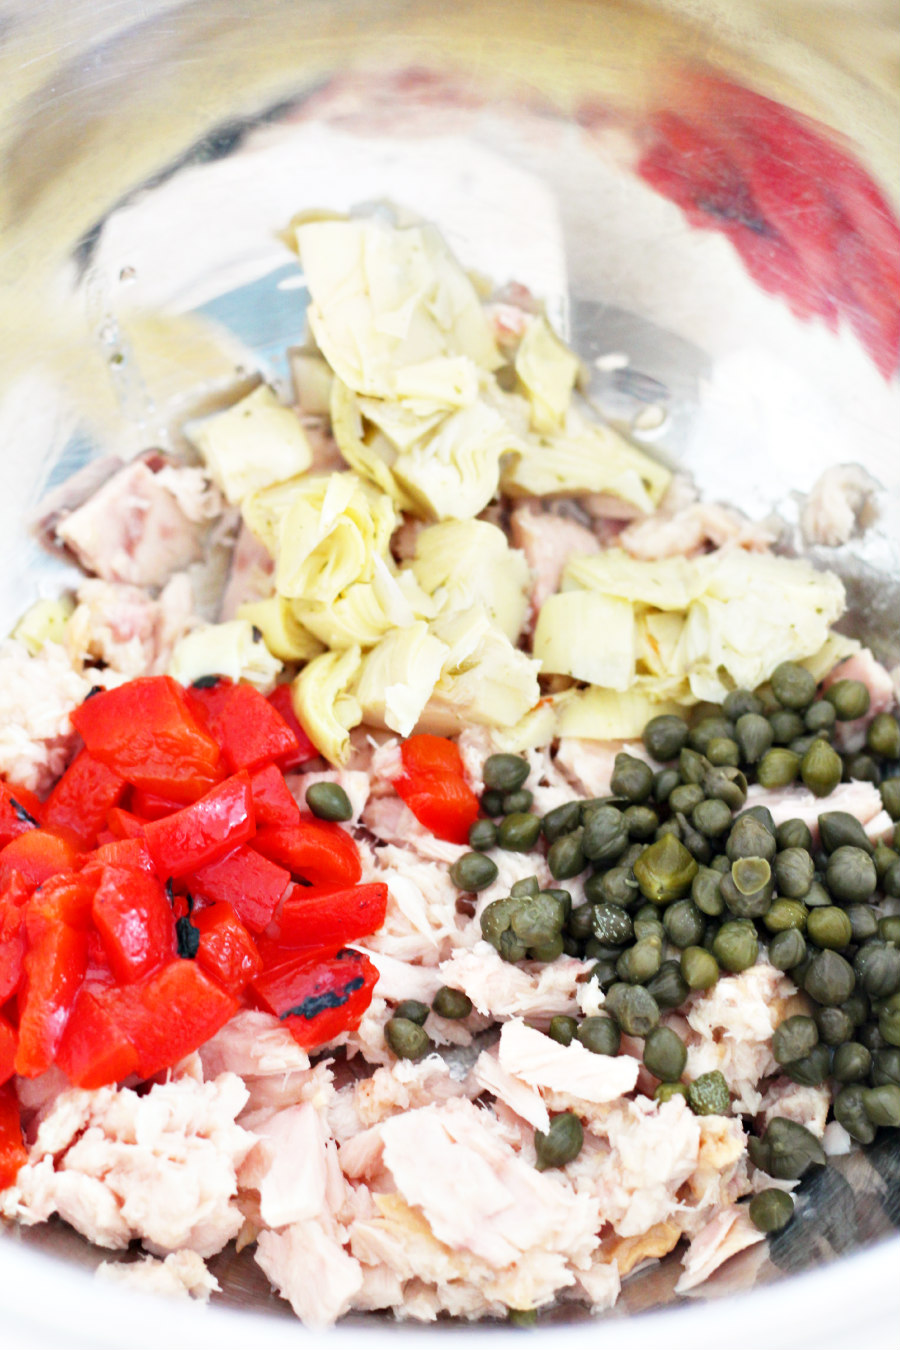 Canned tuna, roasted red peppers, marinated artichokes, and capers in a mixing bowl.